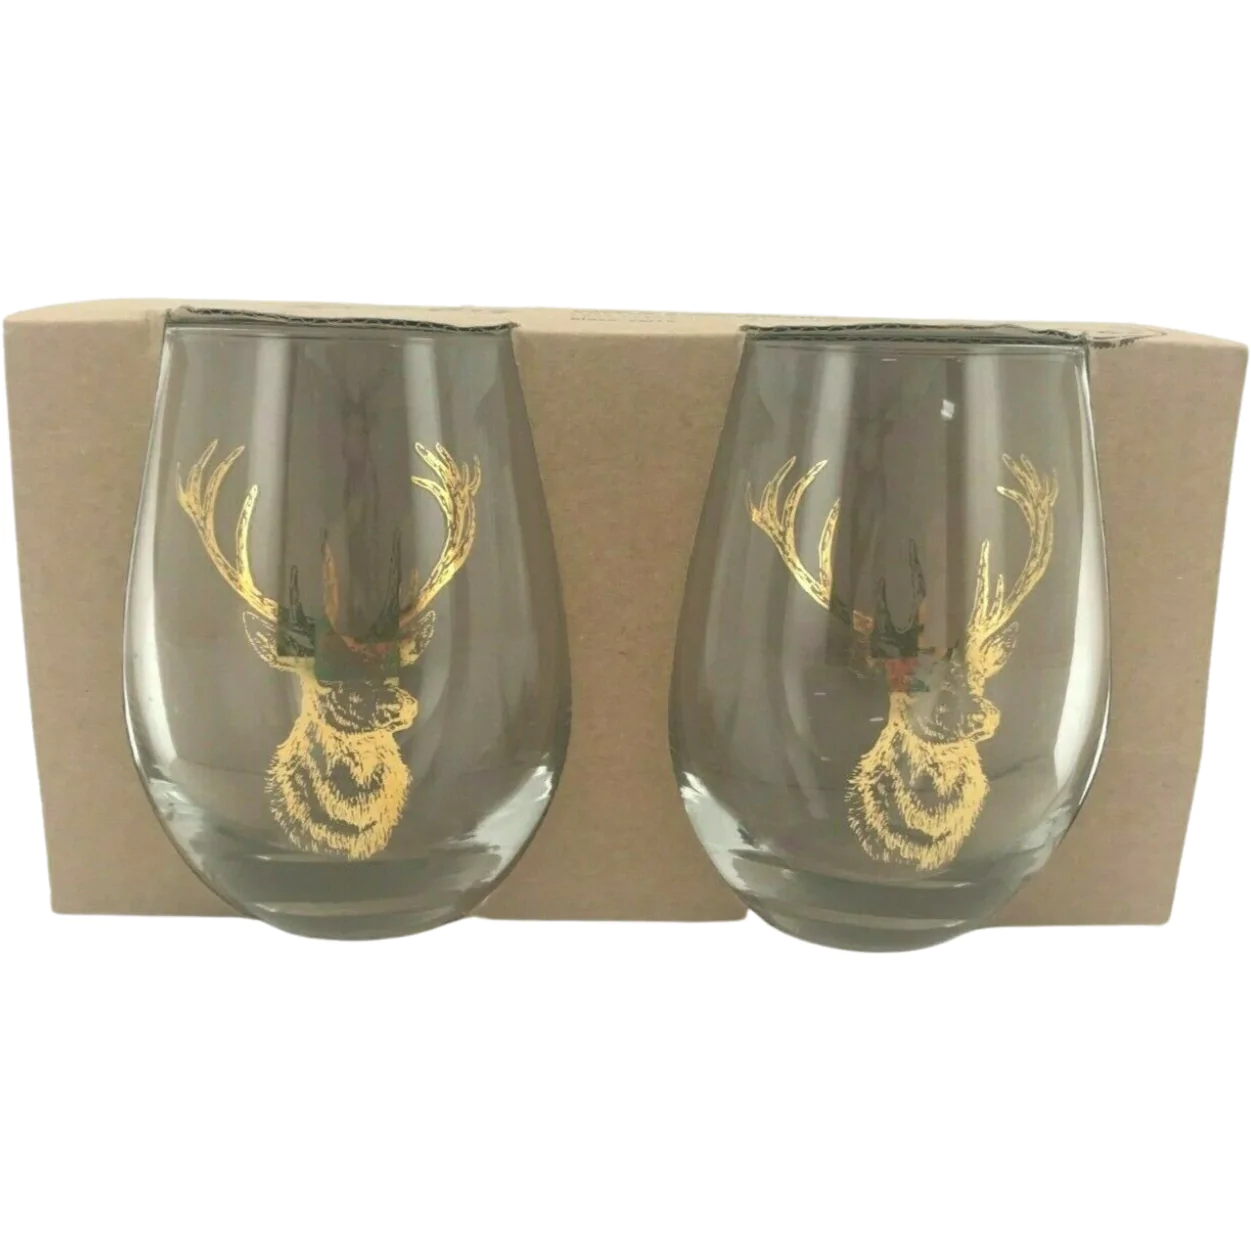 Harmon Stemless Wine Glass Set / 2 Pack / Deer Head Decal / Clear with Gold